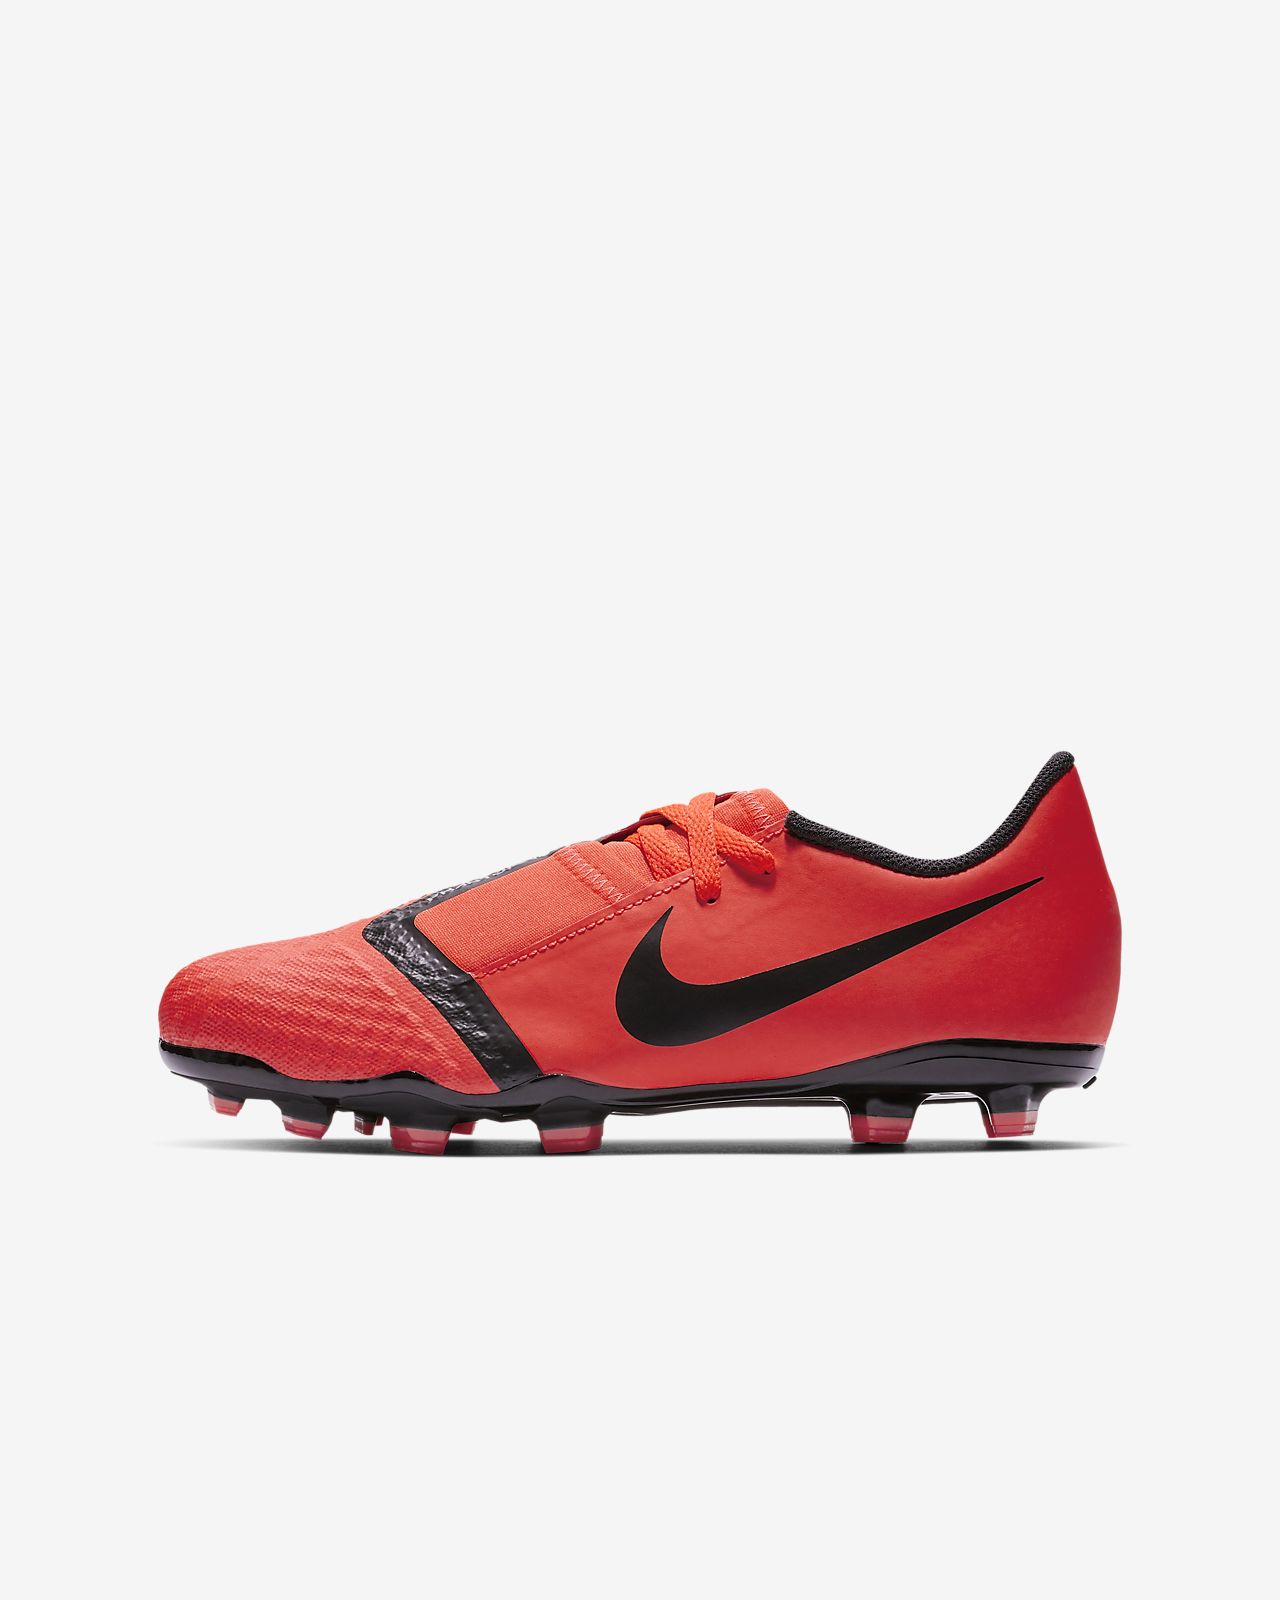 Albums under category 'Nike Phantom VNM' Another Picture Butler Soccer .